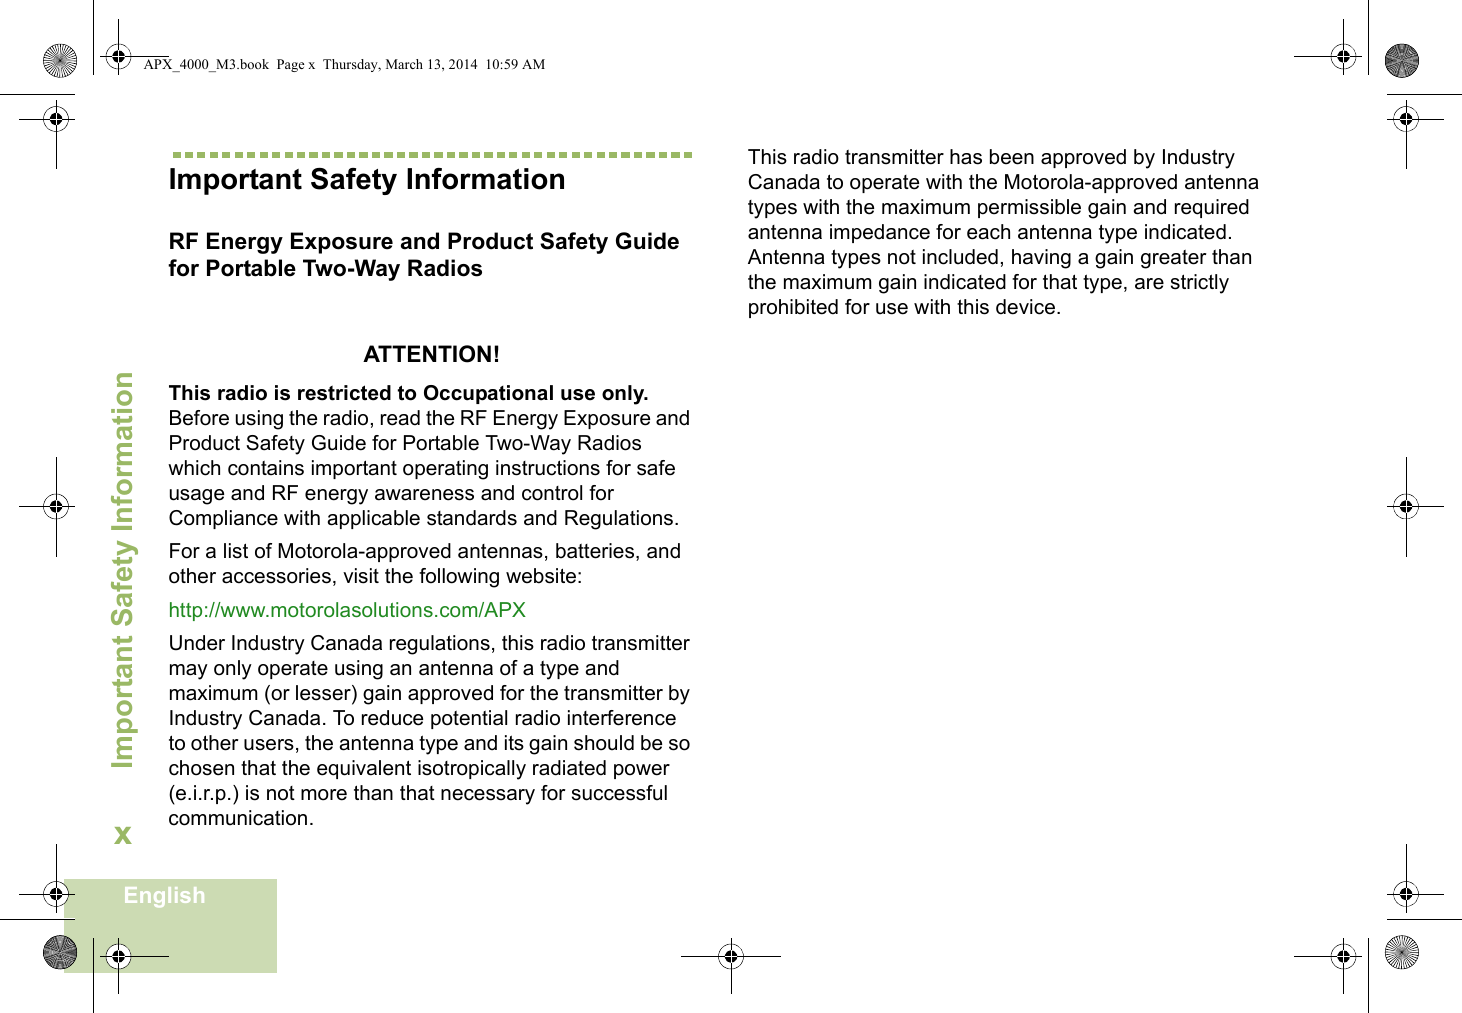 Important Safety InformationEnglishxImportant Safety InformationRF Energy Exposure and Product Safety Guide for Portable Two-Way RadiosATTENTION! This radio is restricted to Occupational use only. Before using the radio, read the RF Energy Exposure and Product Safety Guide for Portable Two-Way Radios which contains important operating instructions for safe usage and RF energy awareness and control for Compliance with applicable standards and Regulations.For a list of Motorola-approved antennas, batteries, and other accessories, visit the following website: http://www.motorolasolutions.com/APXUnder Industry Canada regulations, this radio transmitter may only operate using an antenna of a type and maximum (or lesser) gain approved for the transmitter by Industry Canada. To reduce potential radio interference to other users, the antenna type and its gain should be so chosen that the equivalent isotropically radiated power (e.i.r.p.) is not more than that necessary for successful communication.This radio transmitter has been approved by Industry Canada to operate with the Motorola-approved antenna types with the maximum permissible gain and required antenna impedance for each antenna type indicated. Antenna types not included, having a gain greater than the maximum gain indicated for that type, are strictly prohibited for use with this device.APX_4000_M3.book  Page x  Thursday, March 13, 2014  10:59 AM